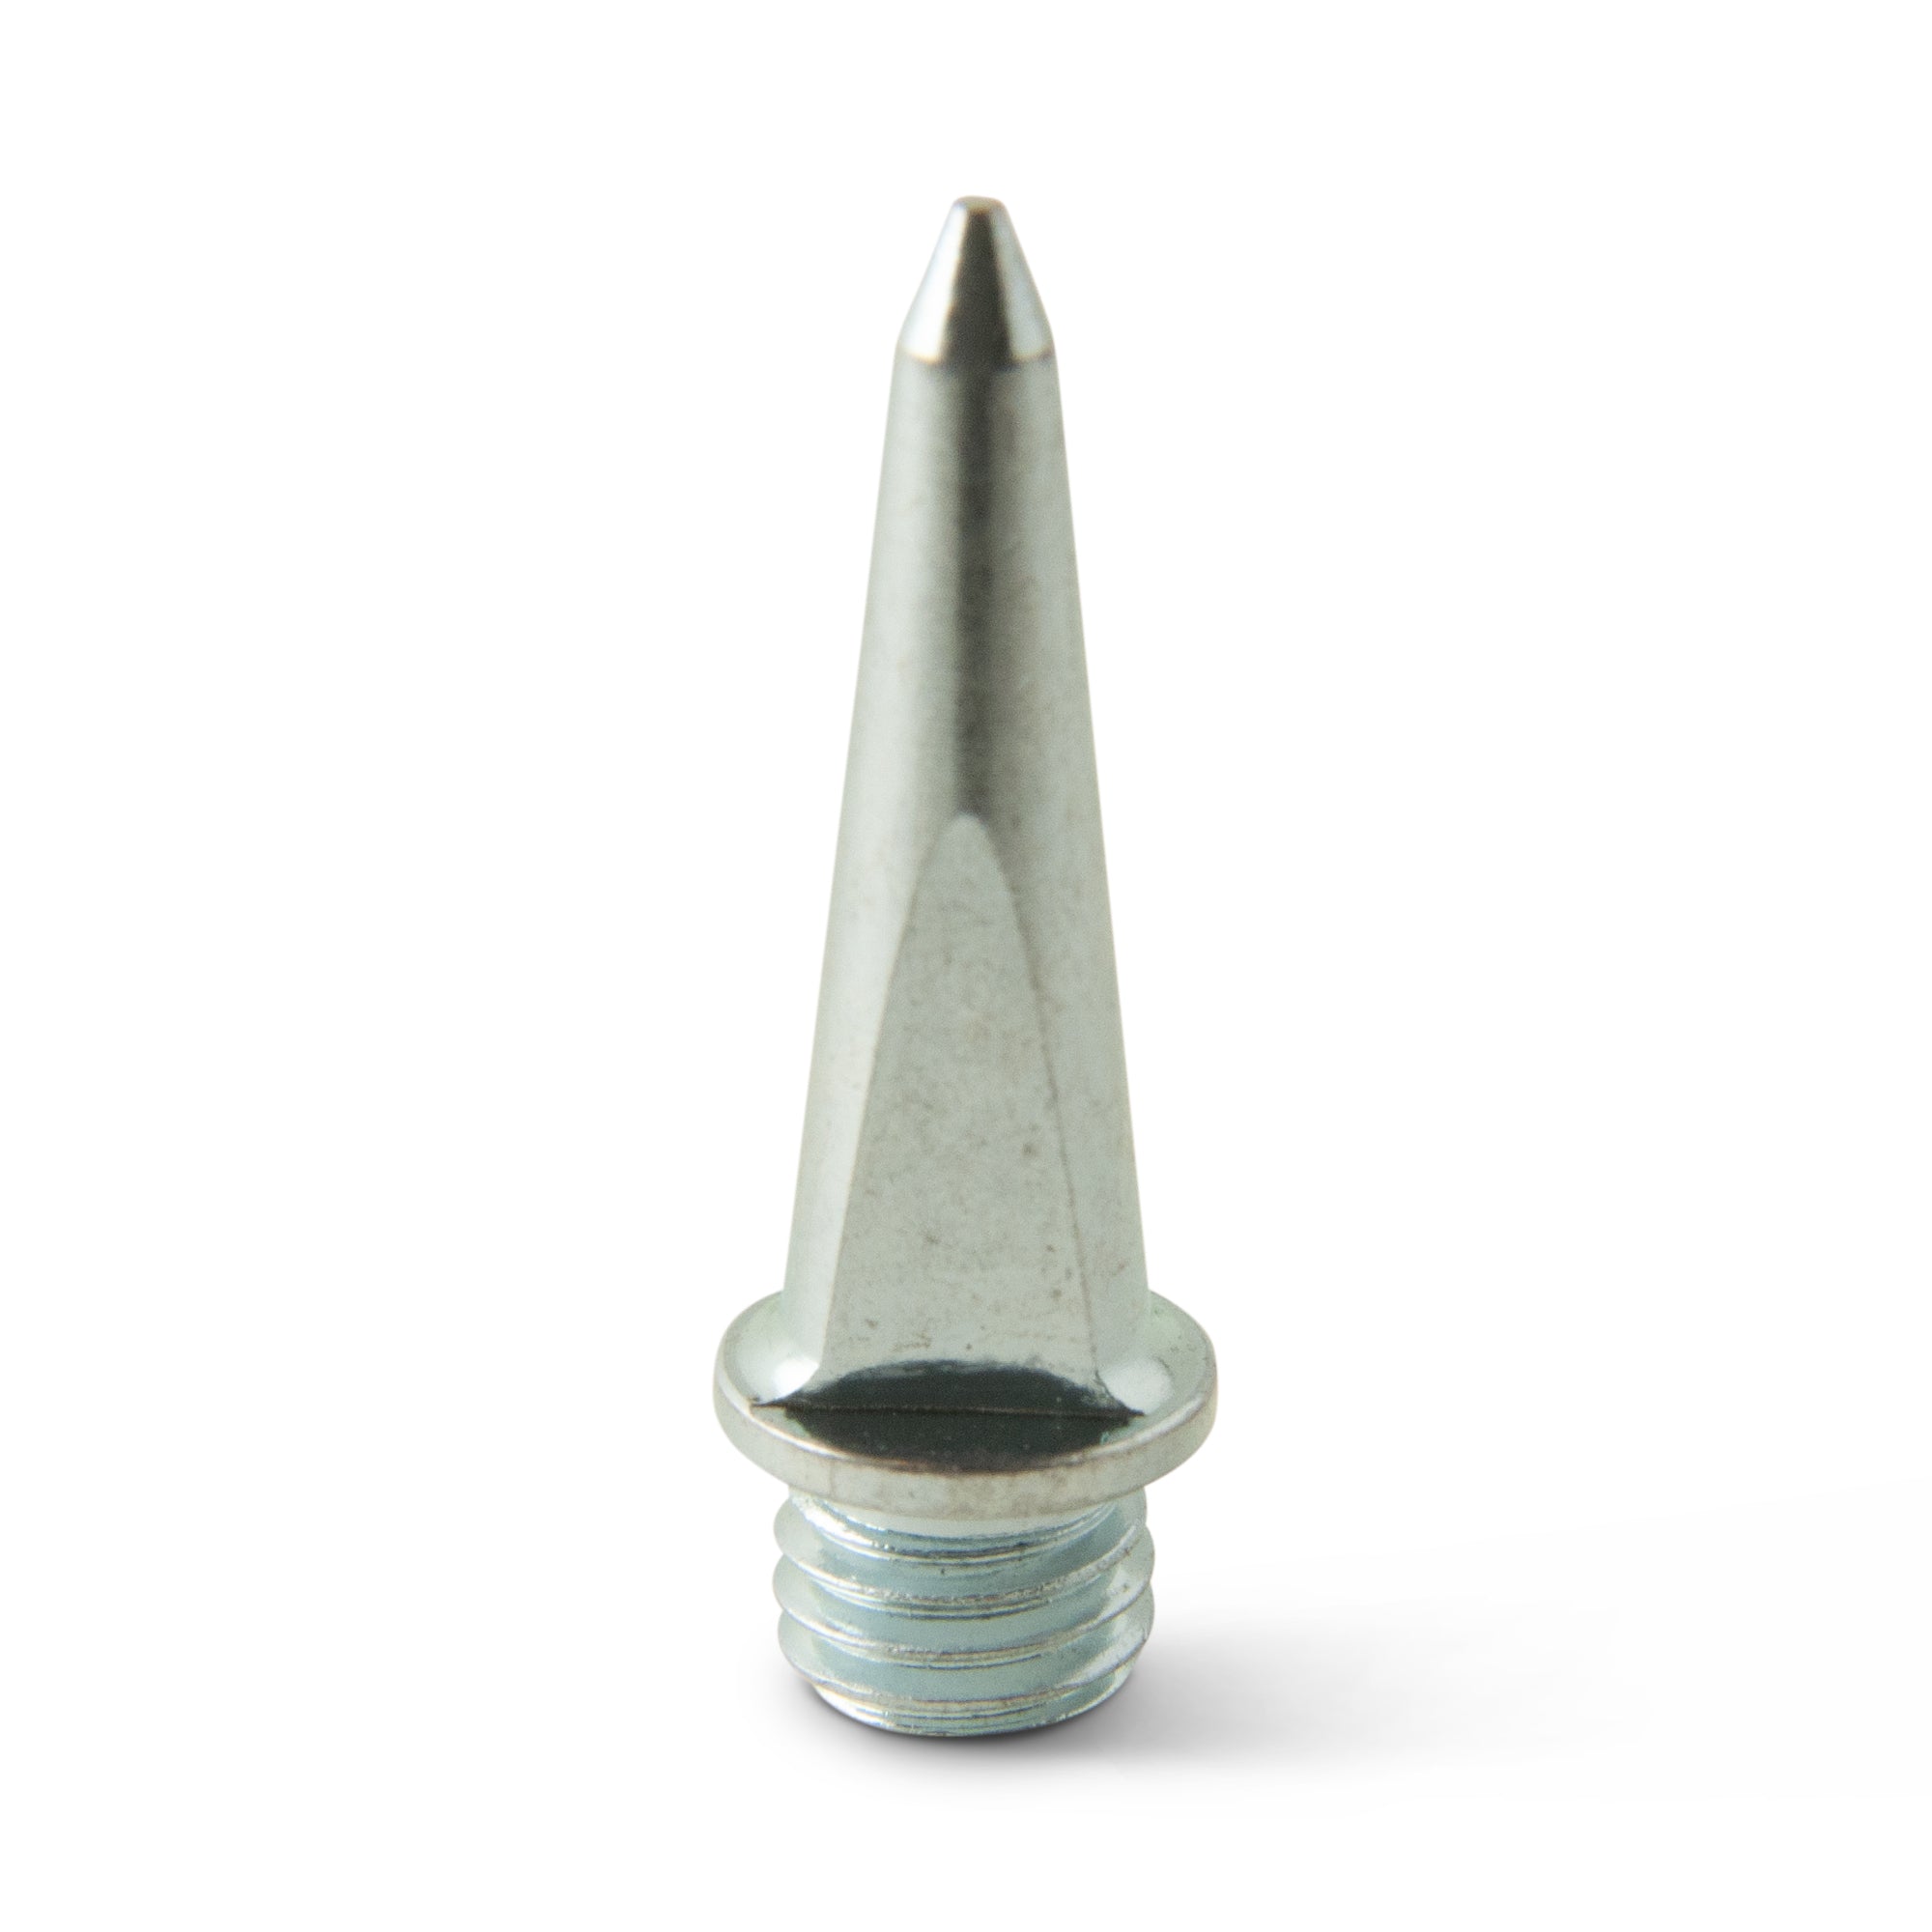 Steel pyramid spikes for athletics - 18mm